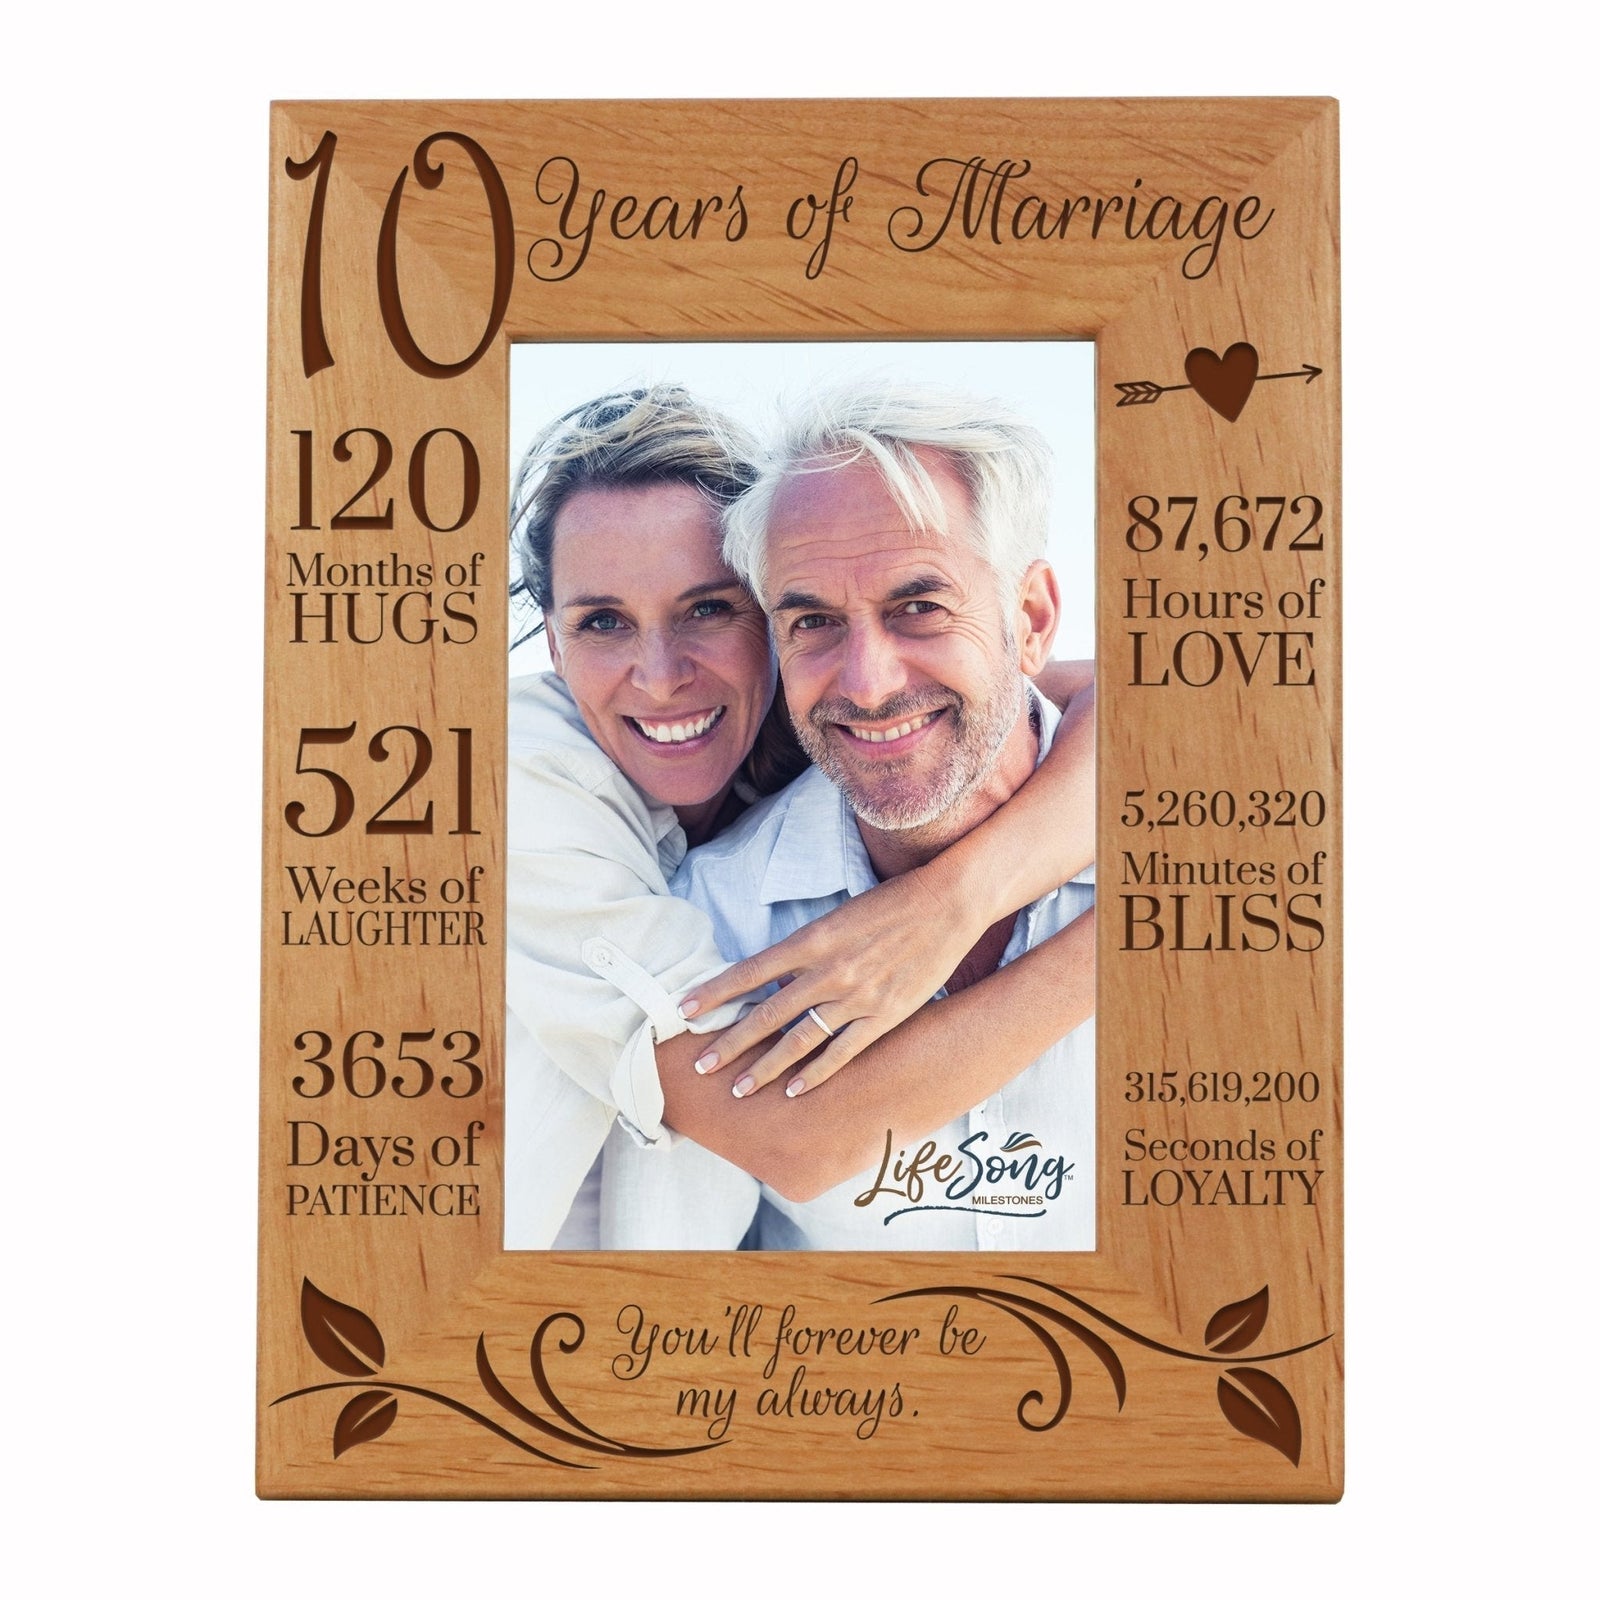 Engraved 10th Anniversary Picture Frame Gift for Couples - Forever Be My Always - LifeSong Milestones